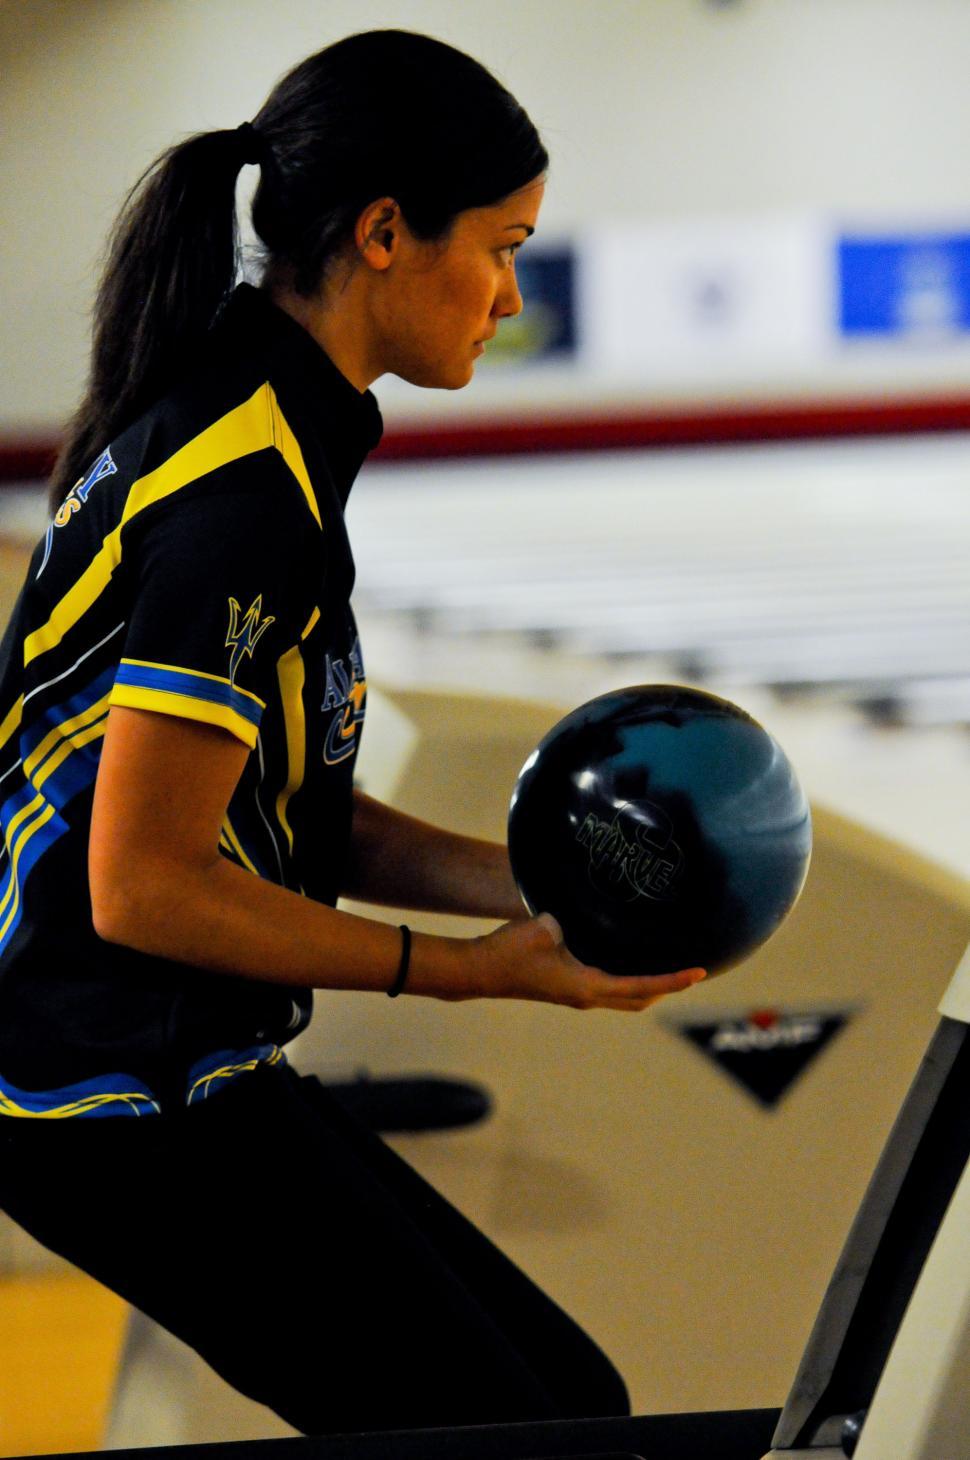 Free Image of Woman Holding Bowling Ball and Bowling Rack 